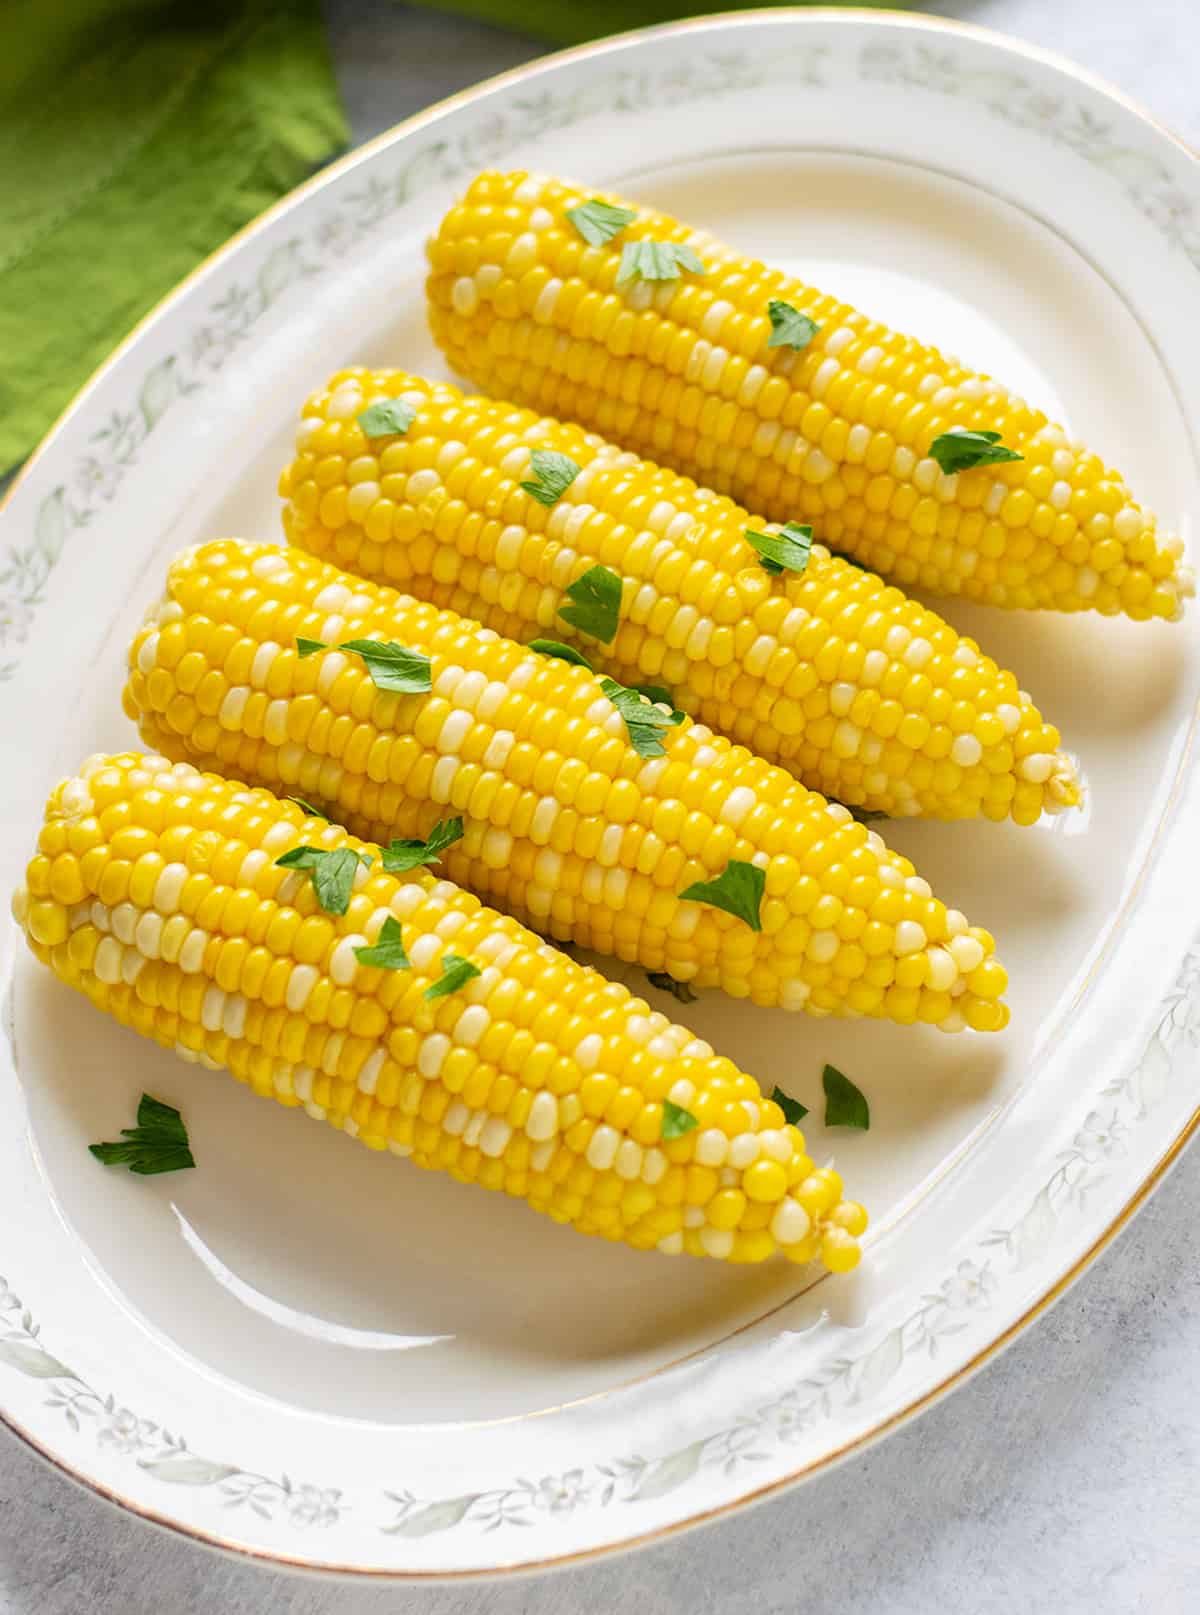 four ears of corn on the cob on a platter with parsley